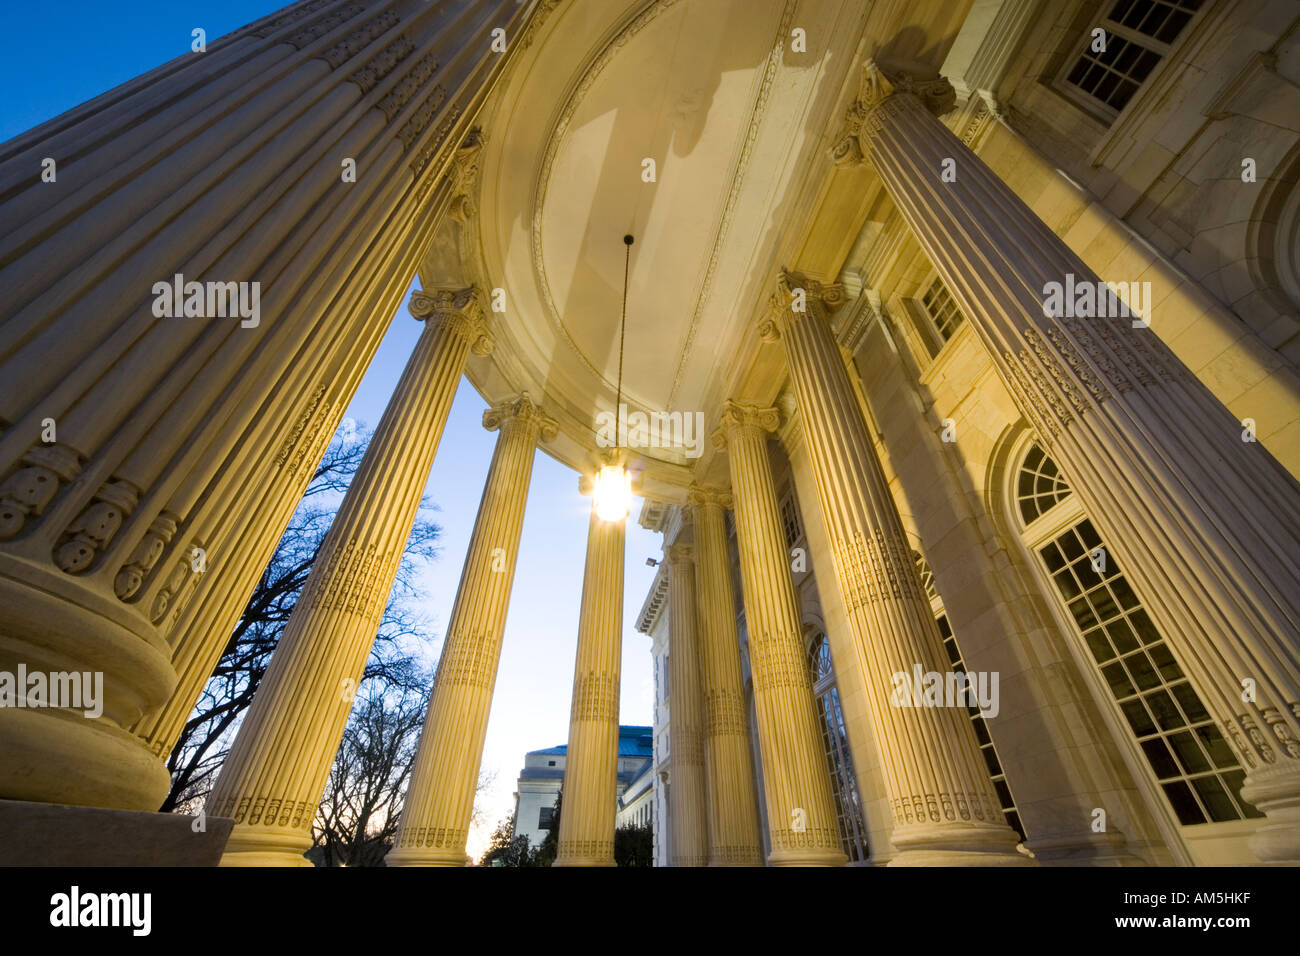 Extreme wide angle view of the covered rotunda of the portico of the DAR hall building Washington DC Stock Photo